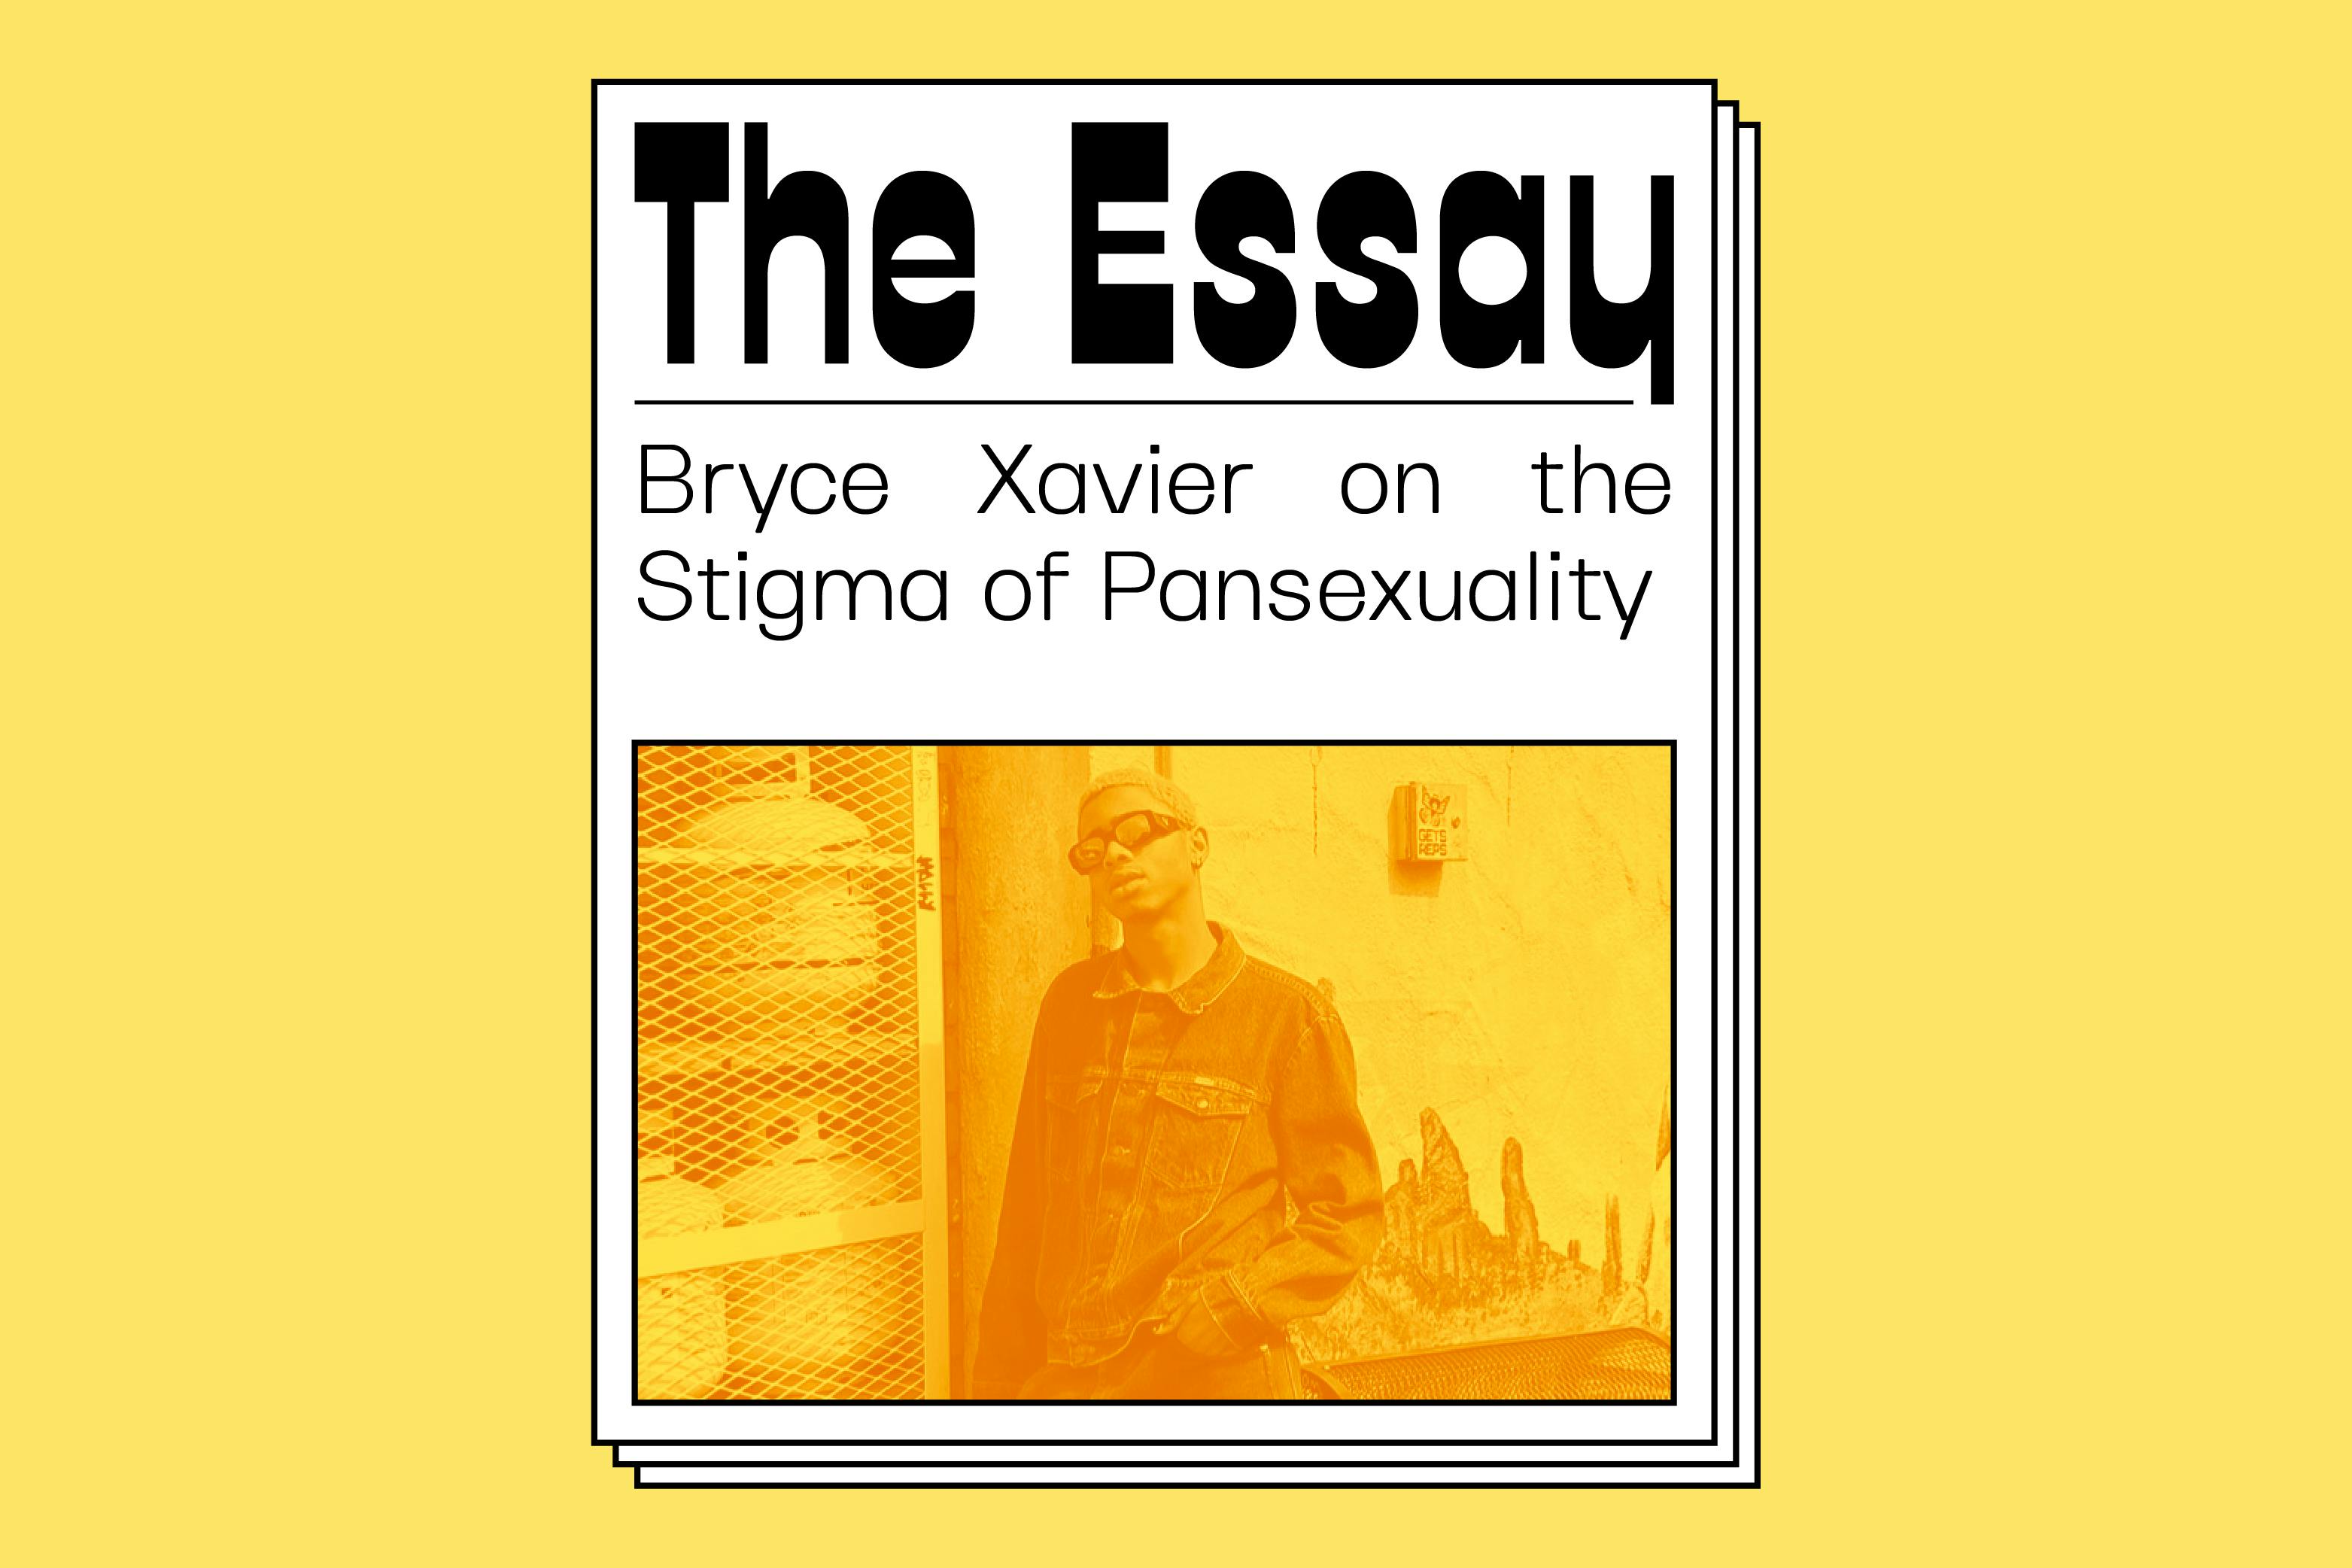 The Essay: Bryce Xavier on the Stigma of Pansexuality